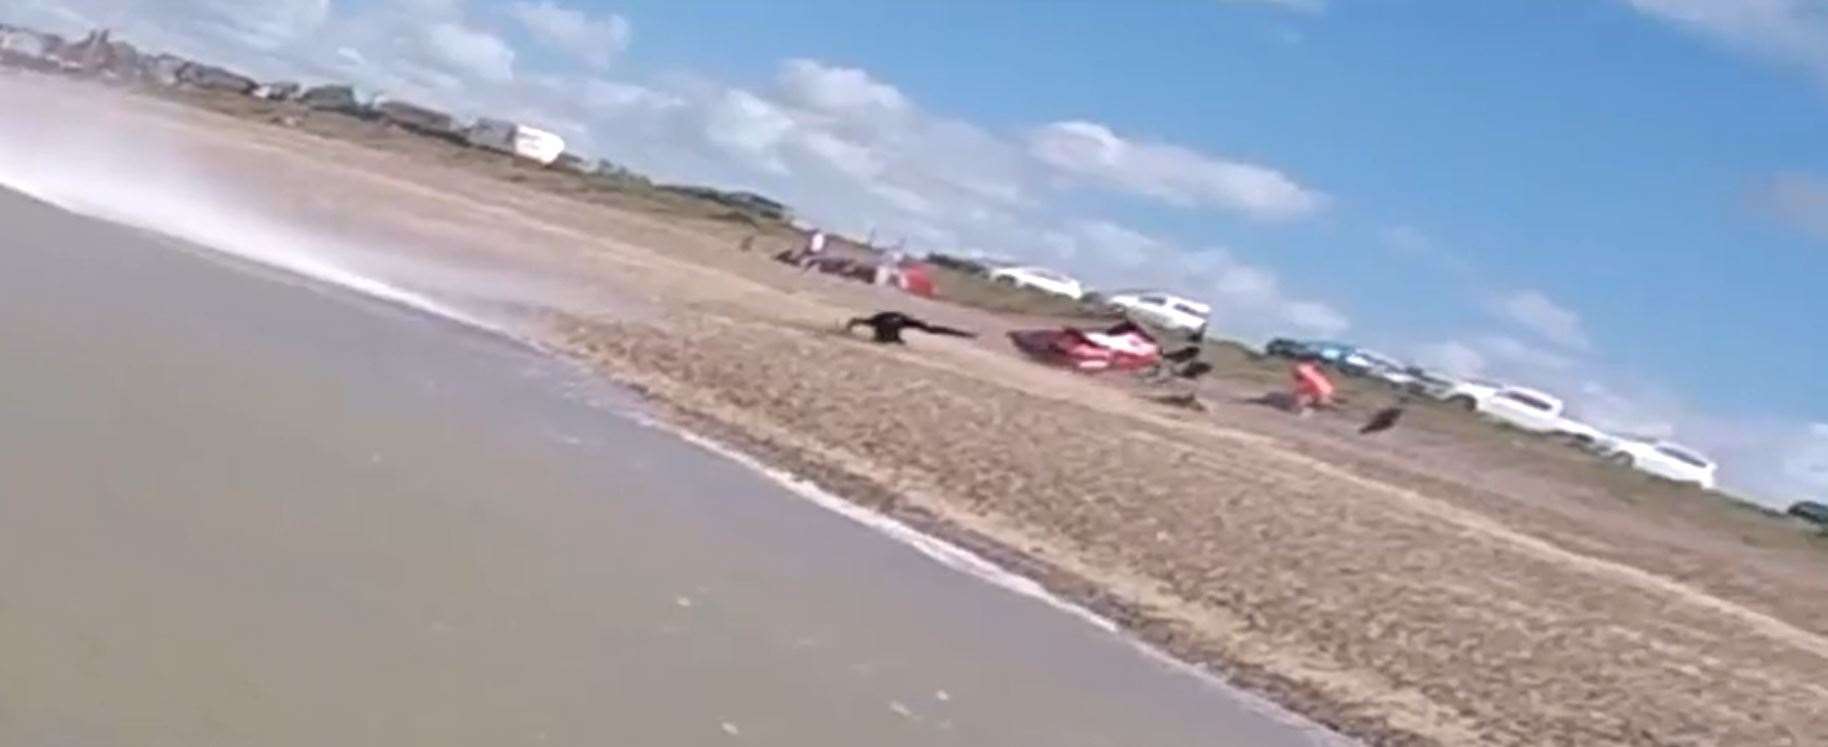 A jet-ski with two people on board went out of control and crashed onto the shingle bank beach at Minster on the Isle of Sheppey. Picture: Denis Gordo